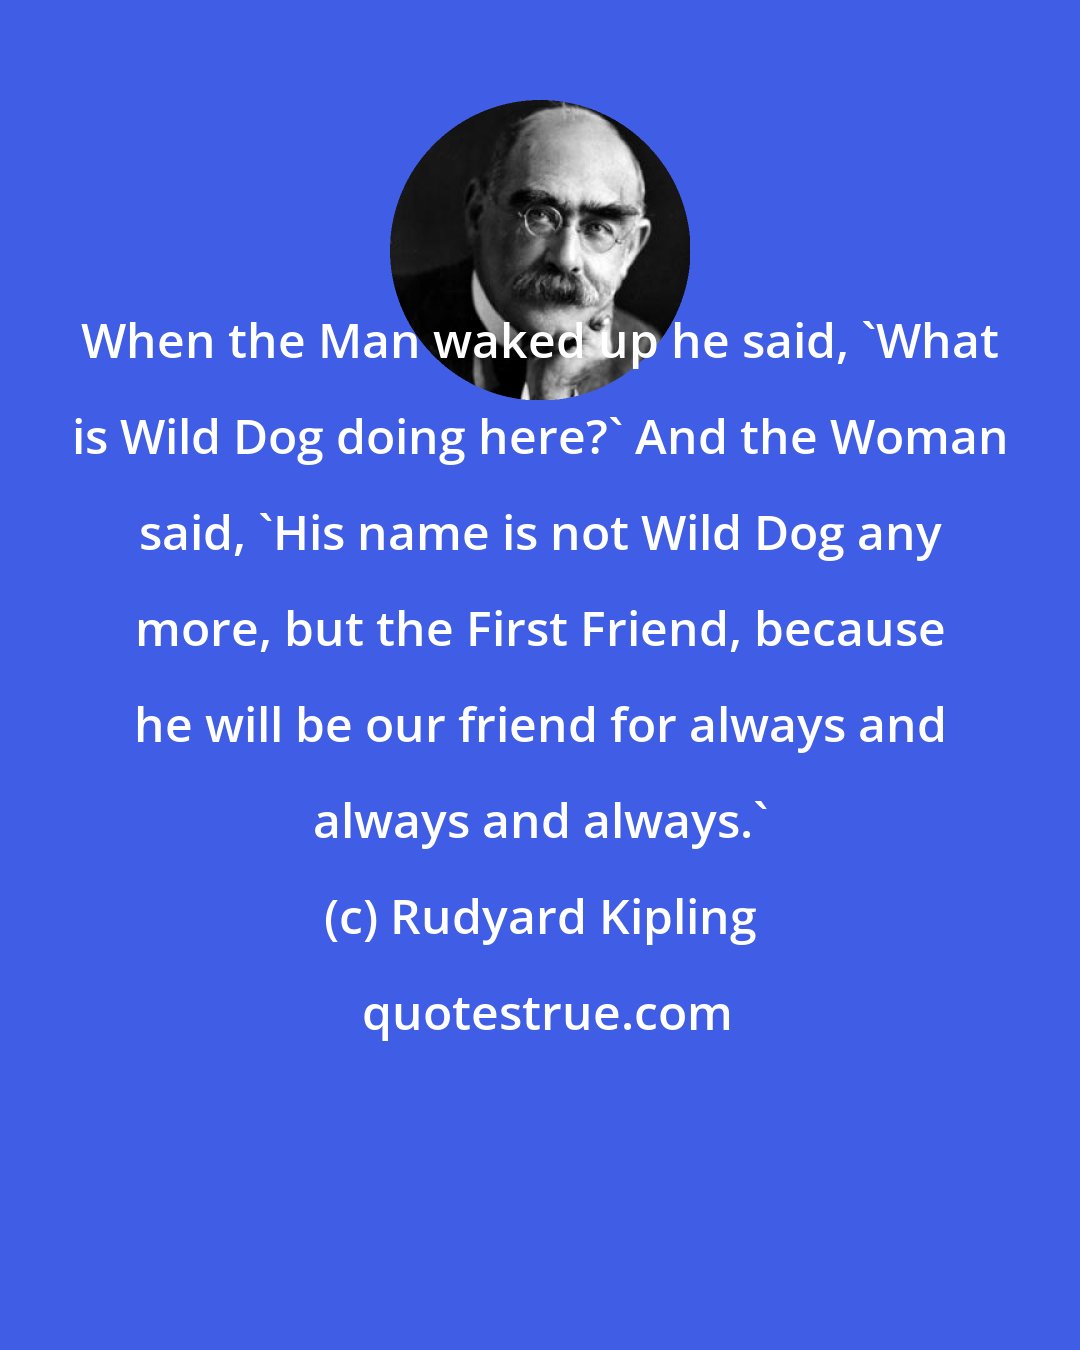 Rudyard Kipling: When the Man waked up he said, 'What is Wild Dog doing here?' And the Woman said, 'His name is not Wild Dog any more, but the First Friend, because he will be our friend for always and always and always.'